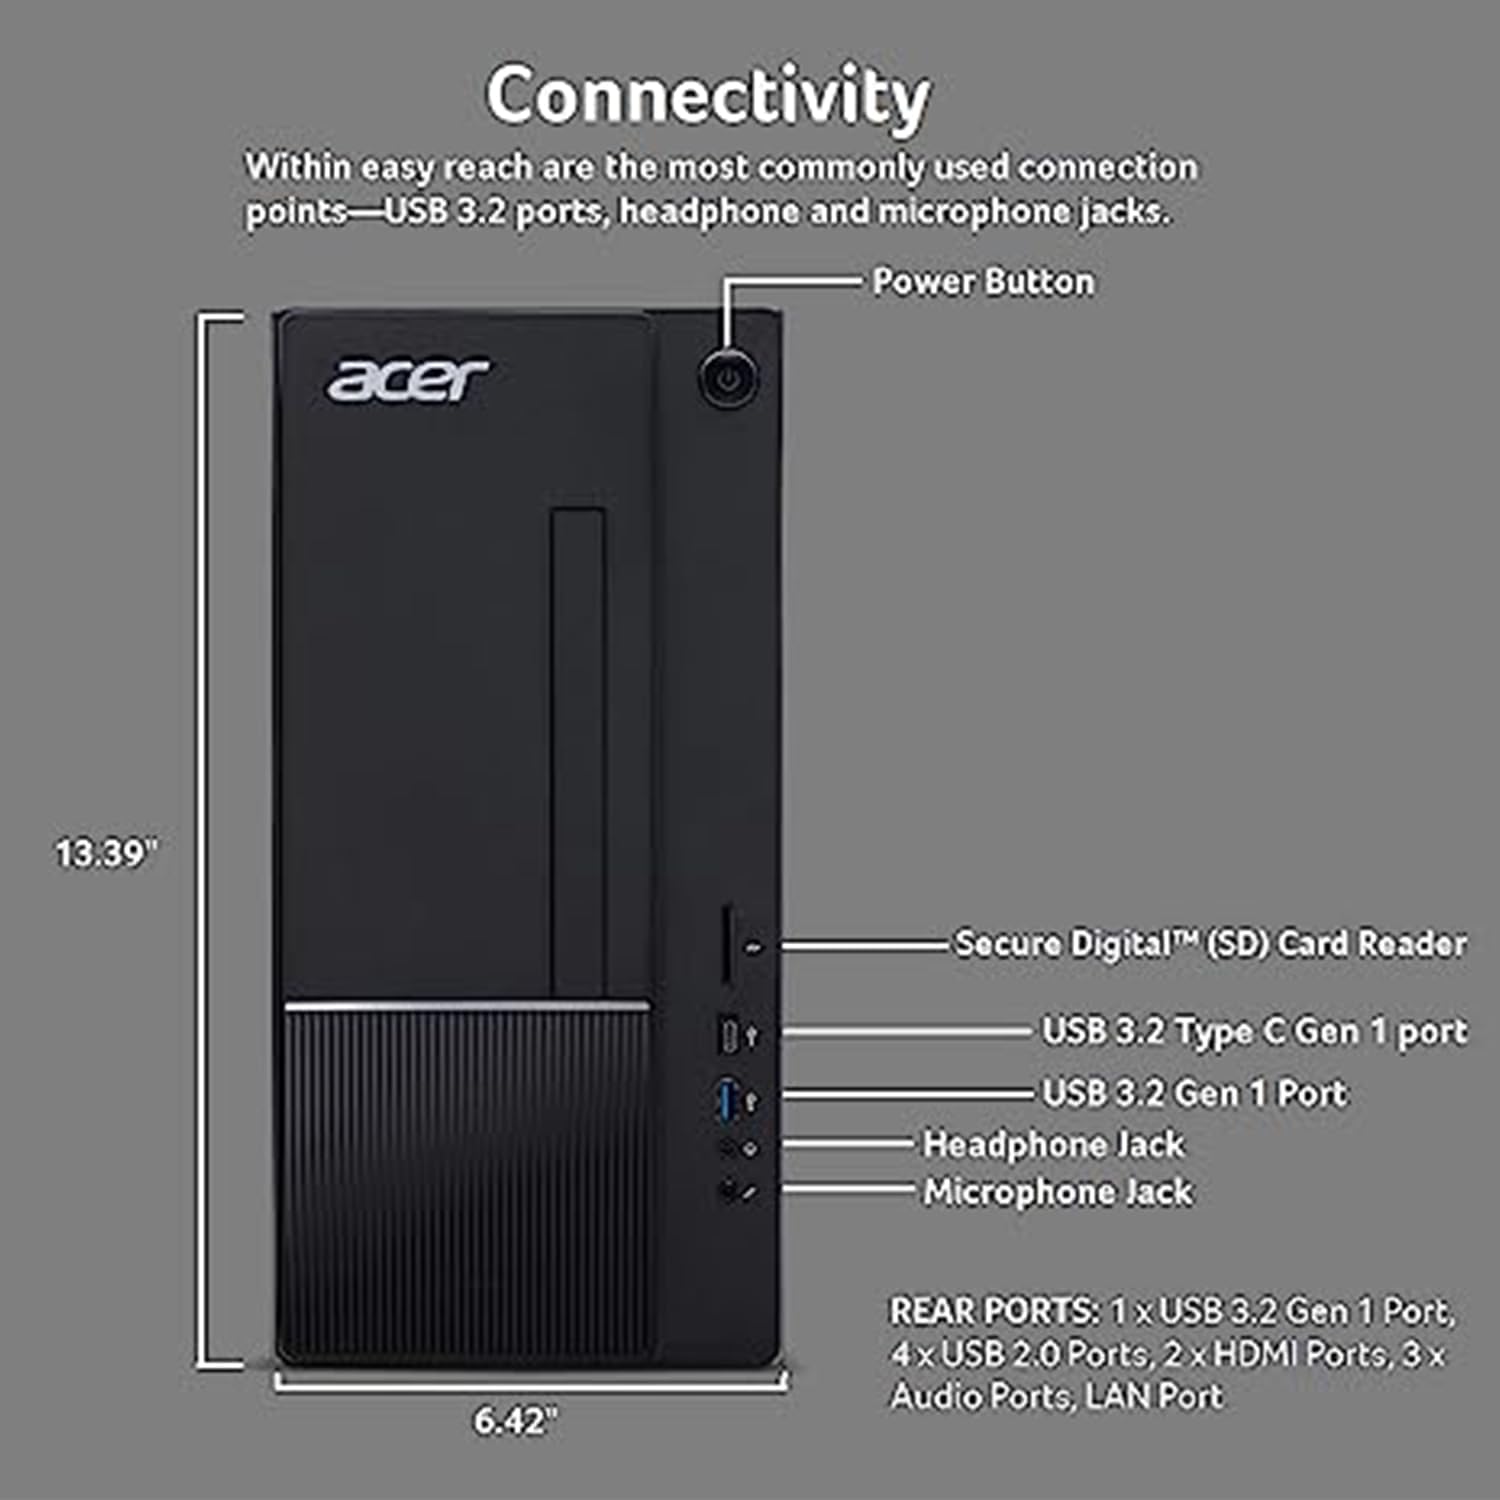 acer Aspire Newest 13th Generation i5 Home  Business Tower Desktop Computer, 13th Gen Intel Core i5-13400, 16GB RAM, 1TB SSD, Wi-Fi 6, HDMI, Wired Keyboard and Mouse, Windows 11 Home, Black : Electronics